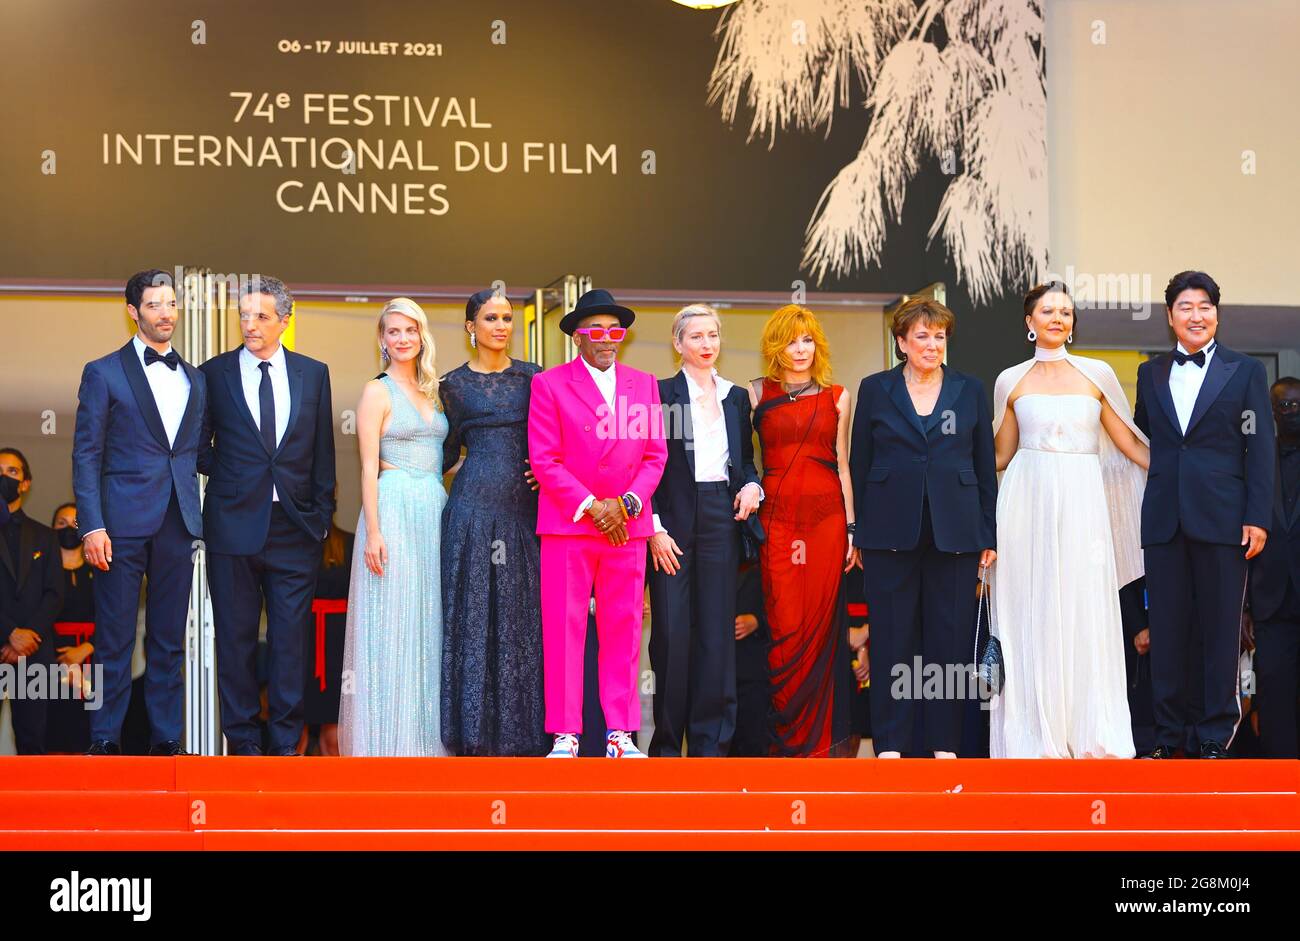 Cannes, Frankreich. 06th July, 2021. Cannes, France - July 06, 2021: Cannes Film Festival with Jury president Spike Lee, Jessica Hausner, Kleber Mendonca Filho, Song Kang-Ho, Melanie Laurent, Mati Diop, Tahar Rahim, Maggie Gyllenhaal, and Mylene Farmer at the Opening Ceremony in the Palais de Credit: dpa/Alamy Live News Stock Photo